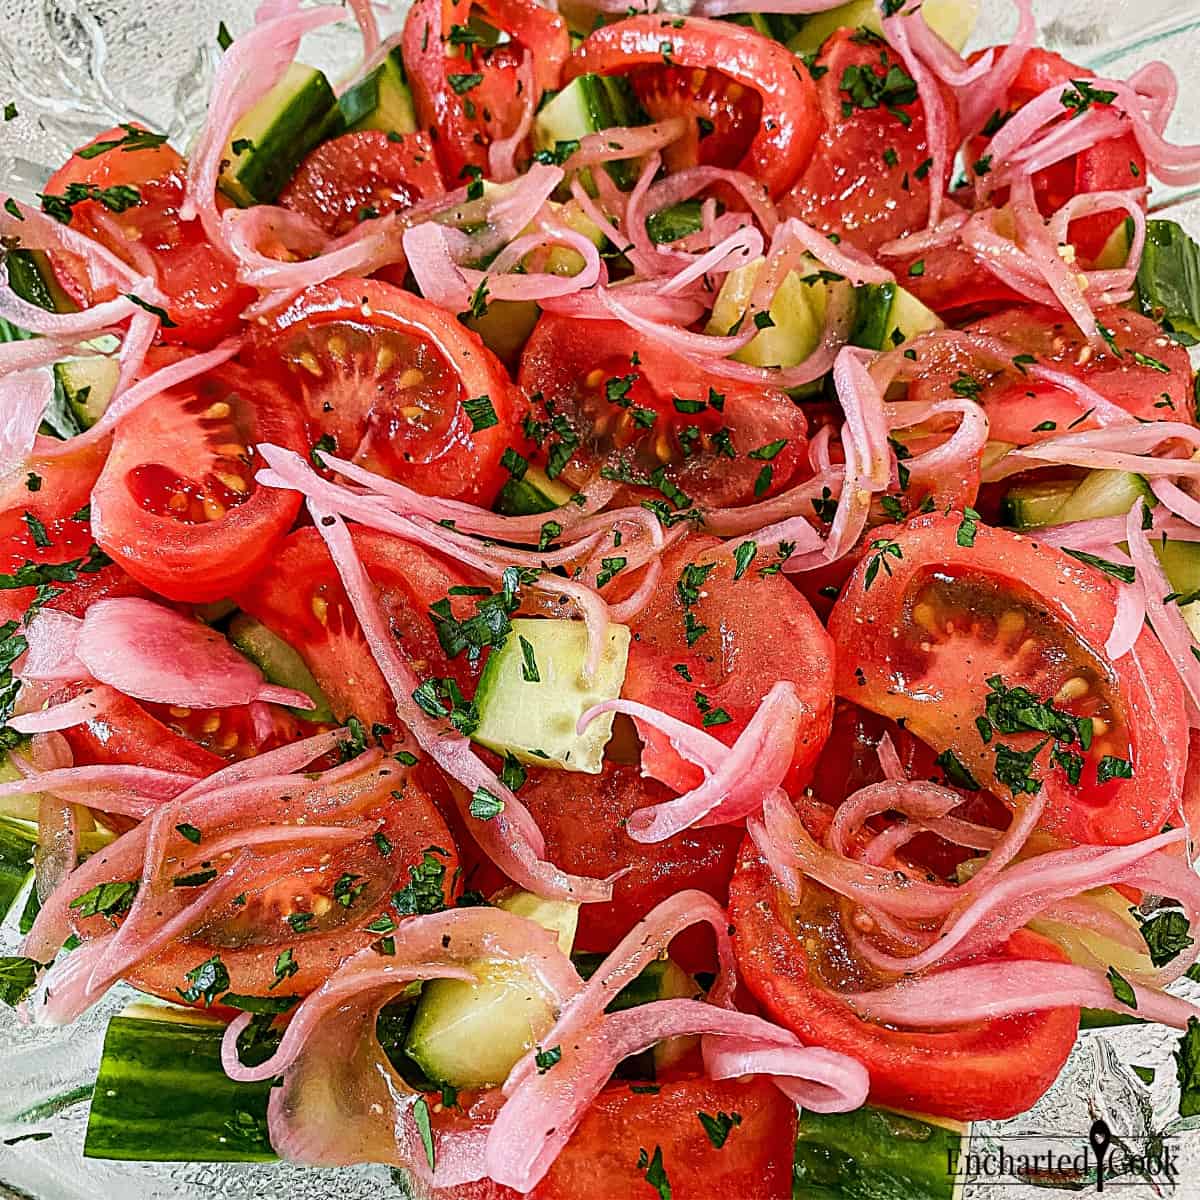 Close up view of wedges of bright red tomatoes are mixed with cucumber and pickled red onions in a large green glass bowl.